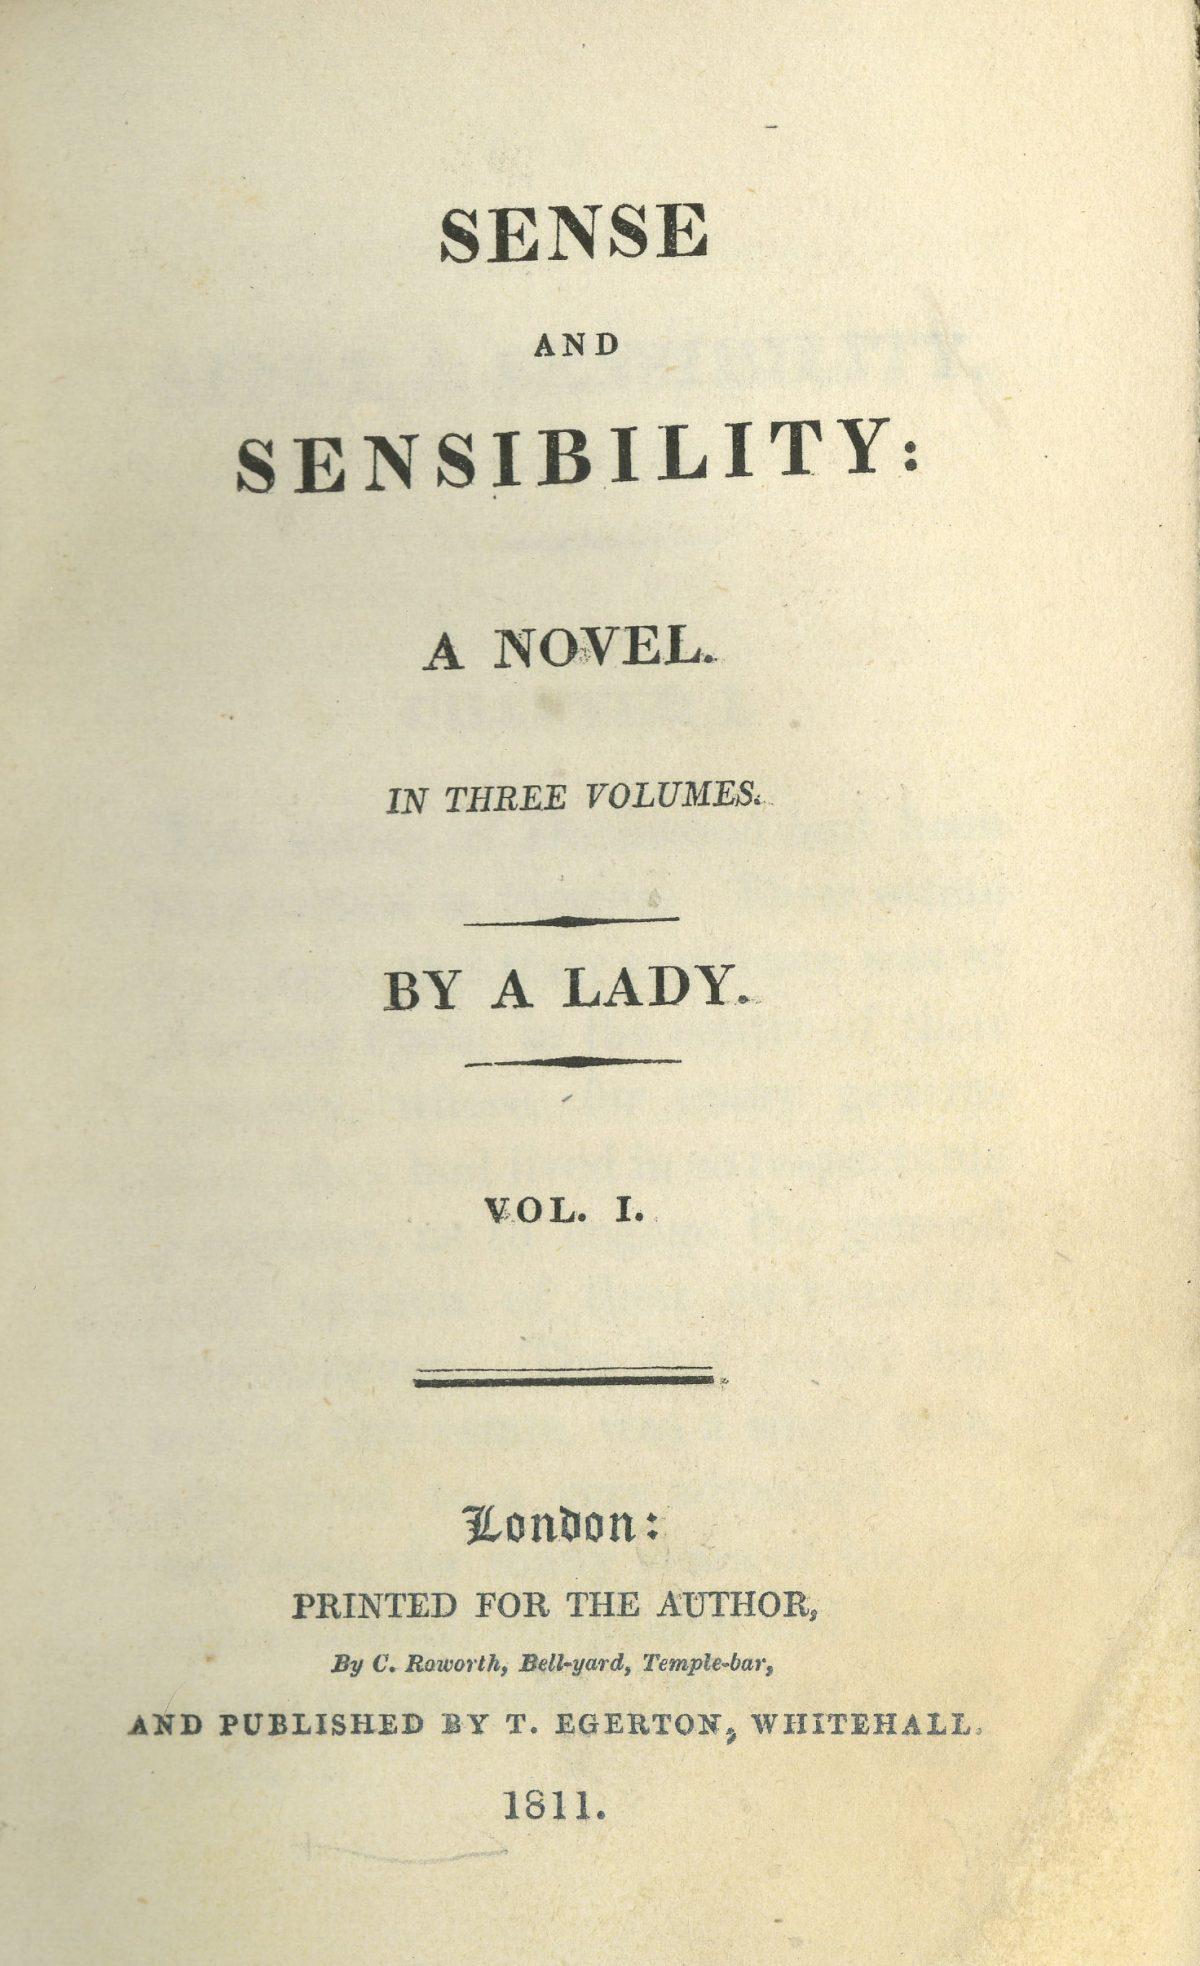 The title page from the first edition of Jane Austen's "Sense and Sensibility," 1811. Lilly Library, Indiana University. (Public Domain)